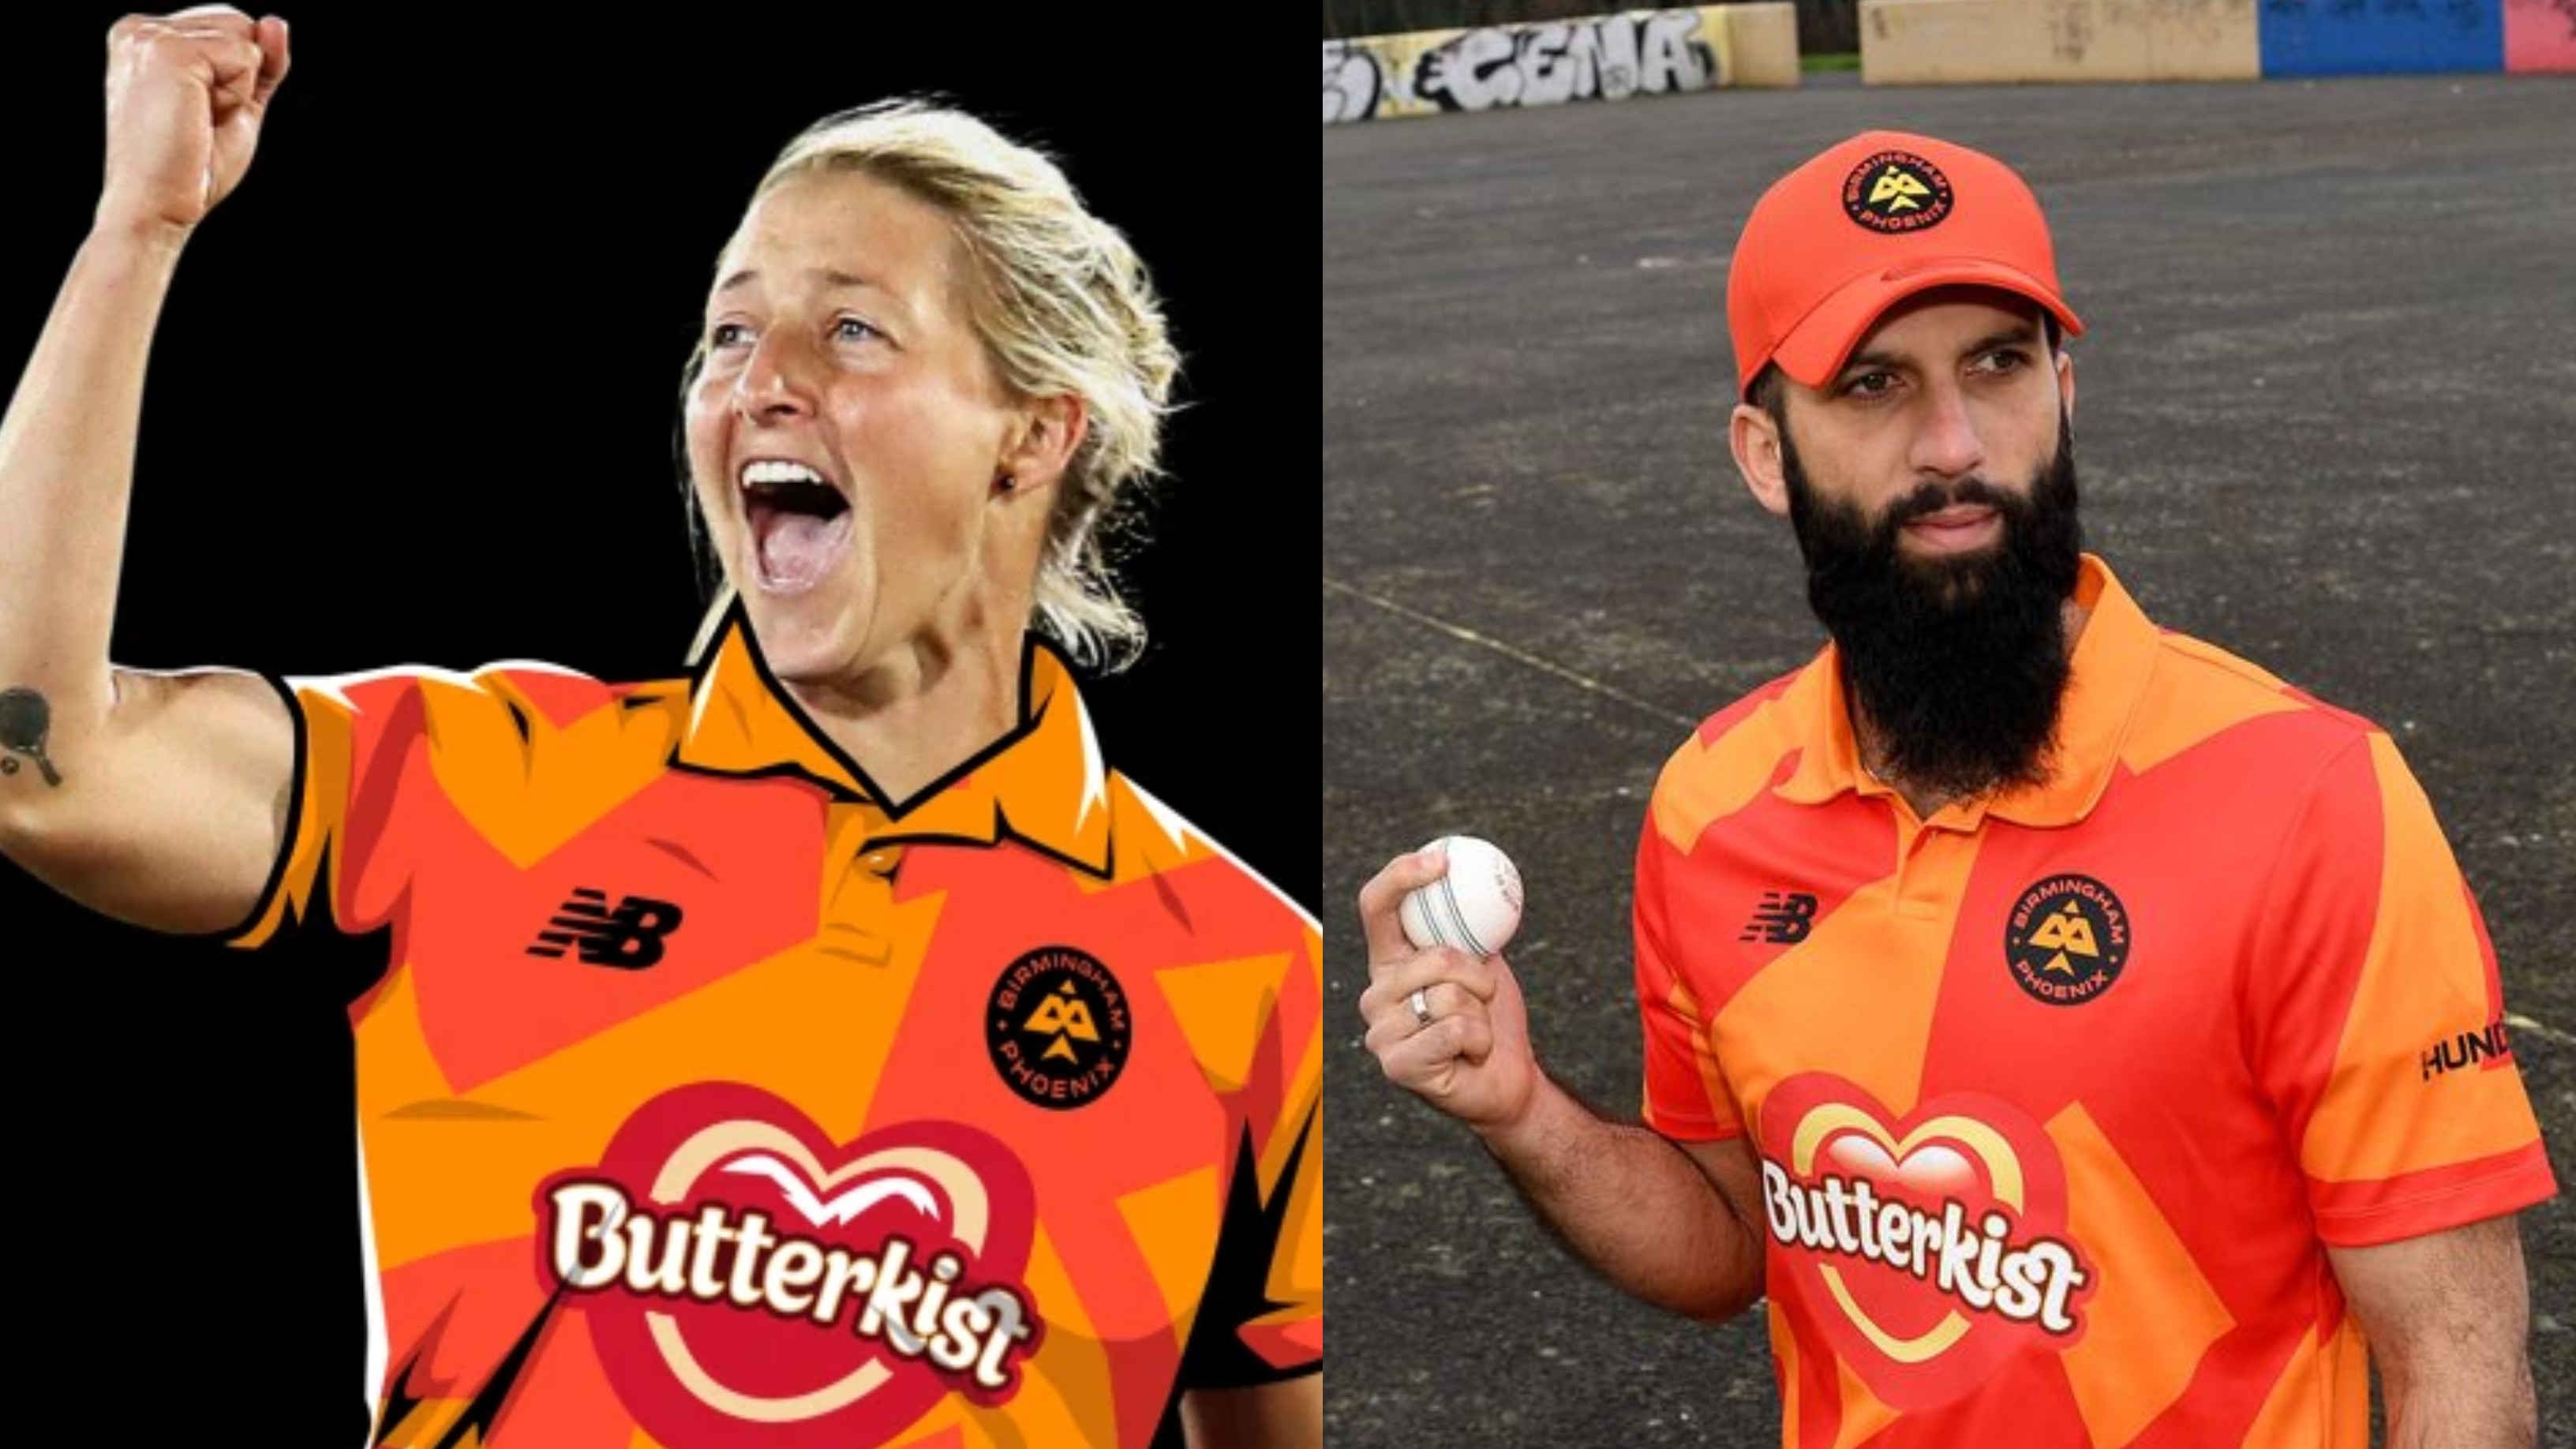 Moeen Ali and Sophie Devine retained as Birmingham Phoenix captains for The Hundred